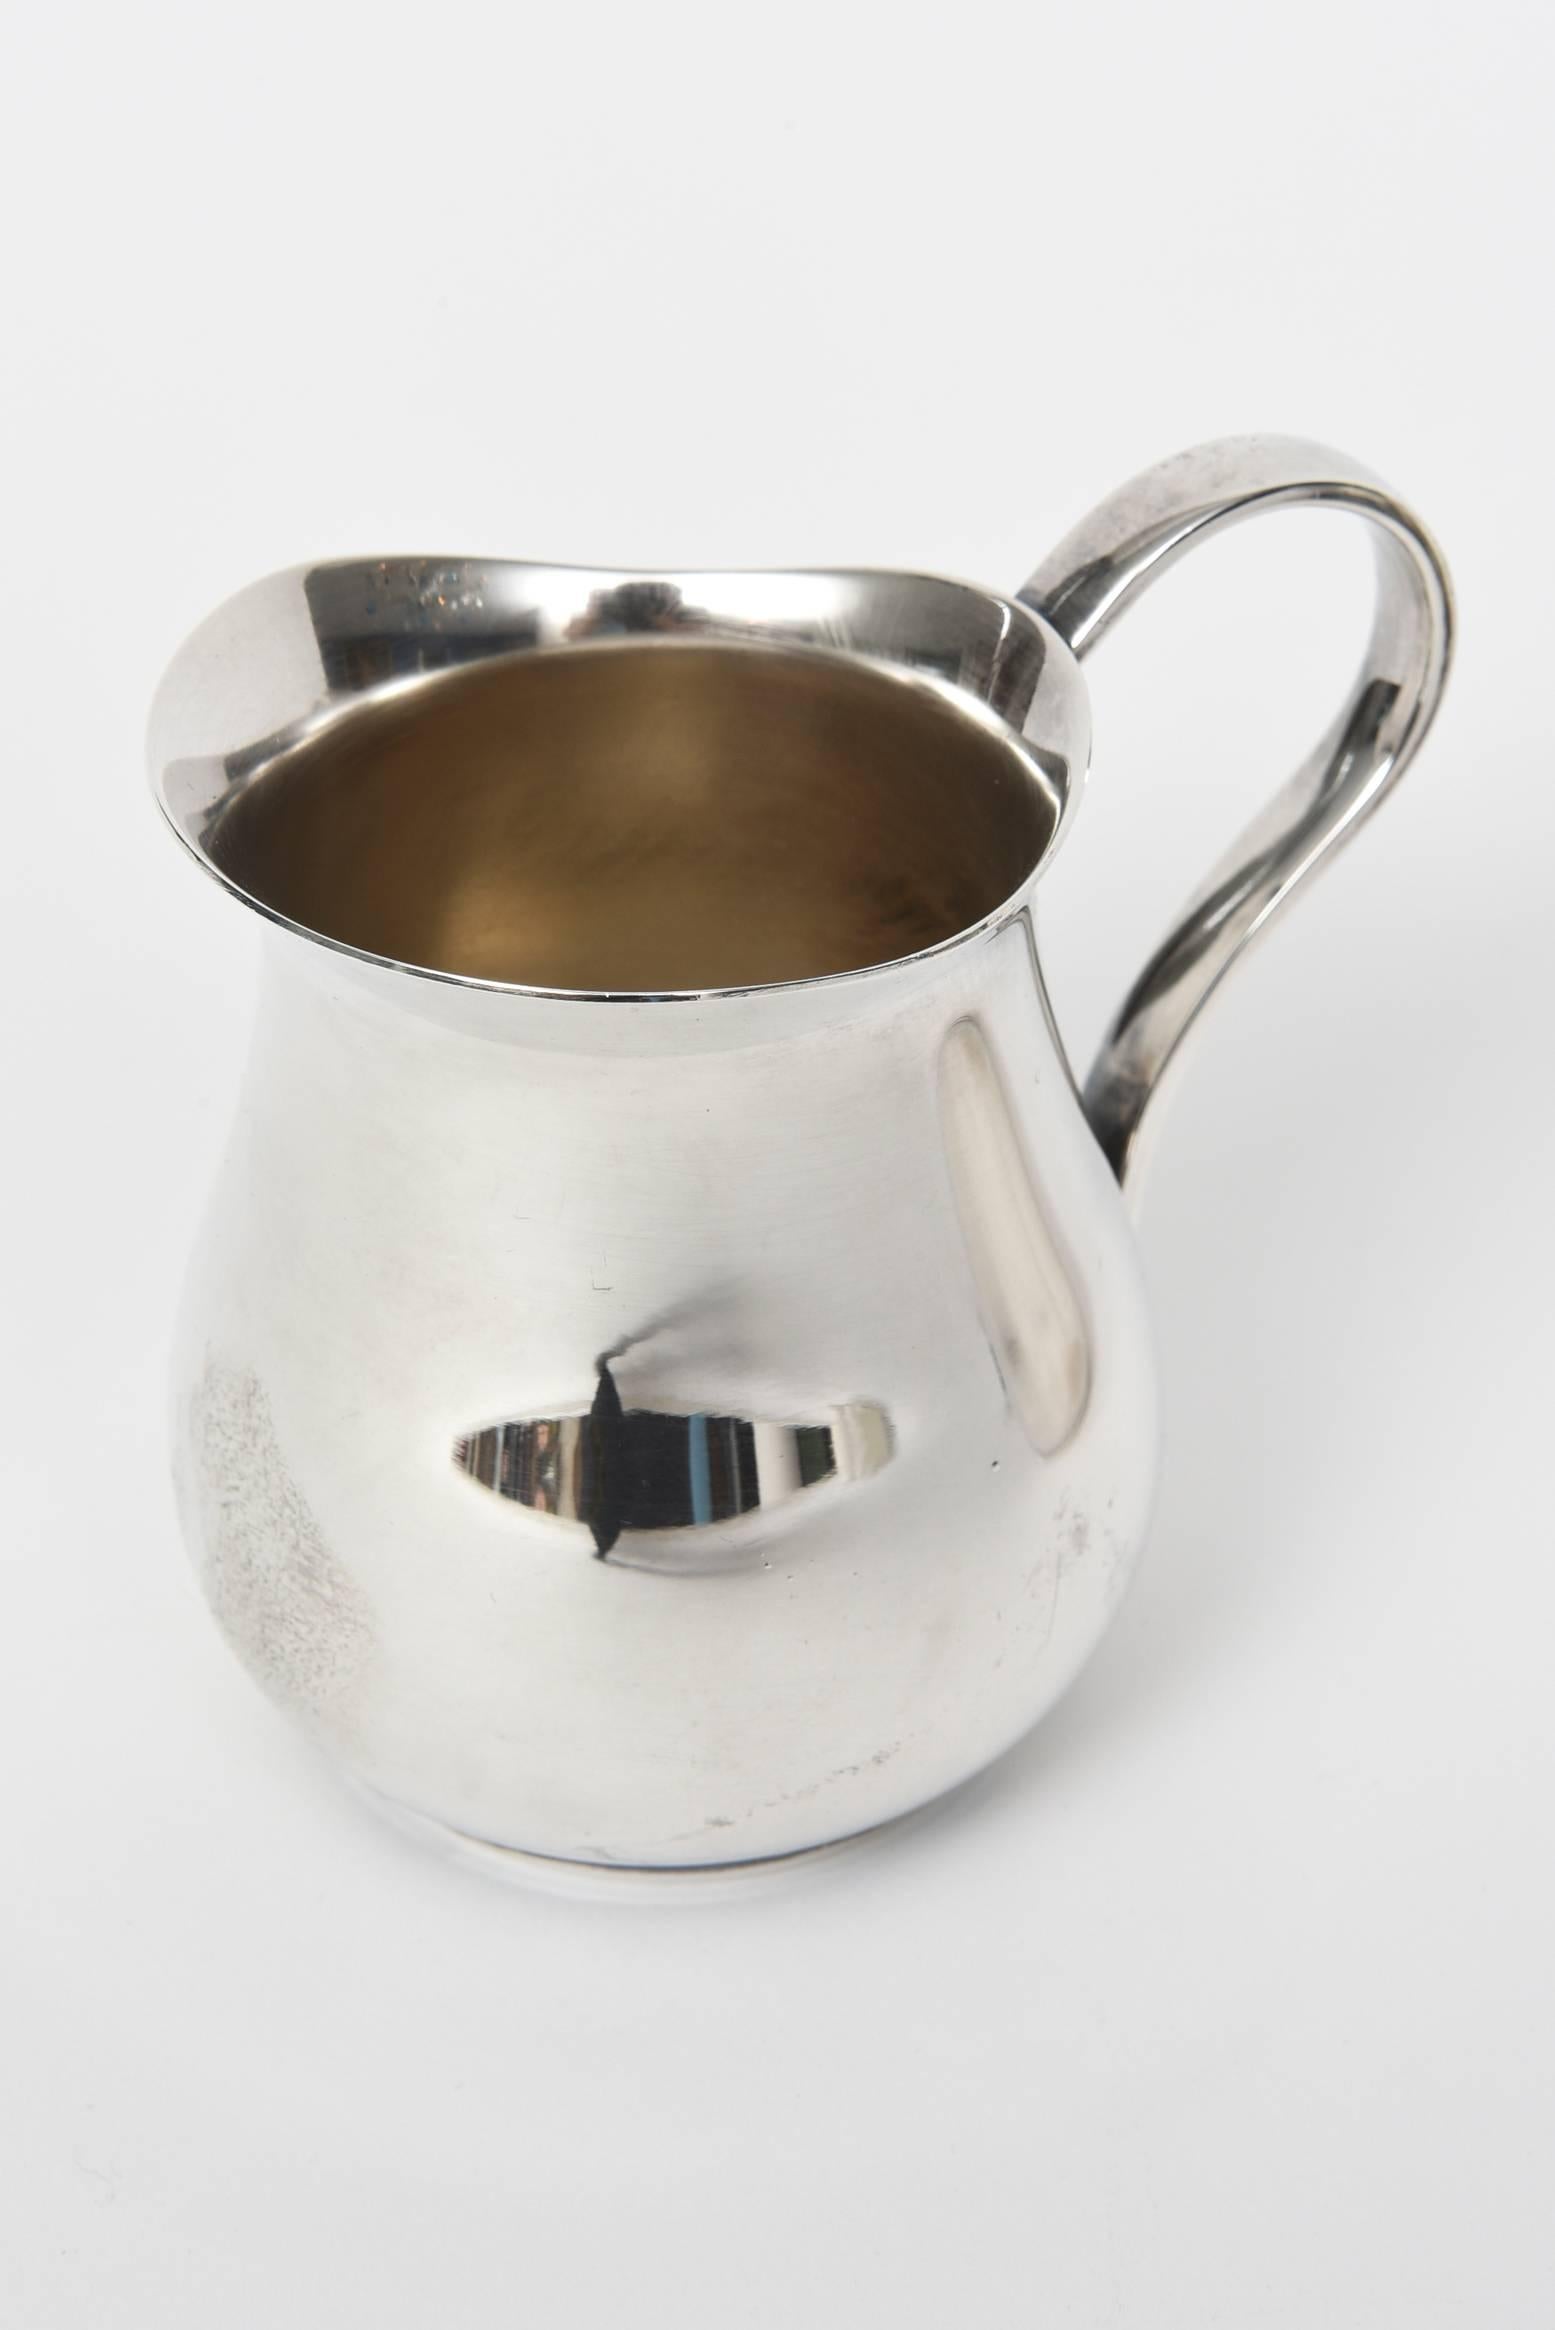 Christofle silver plated sugar bowl with lid and creamer in the Albi pattern,
Sugar bowl is 4.5